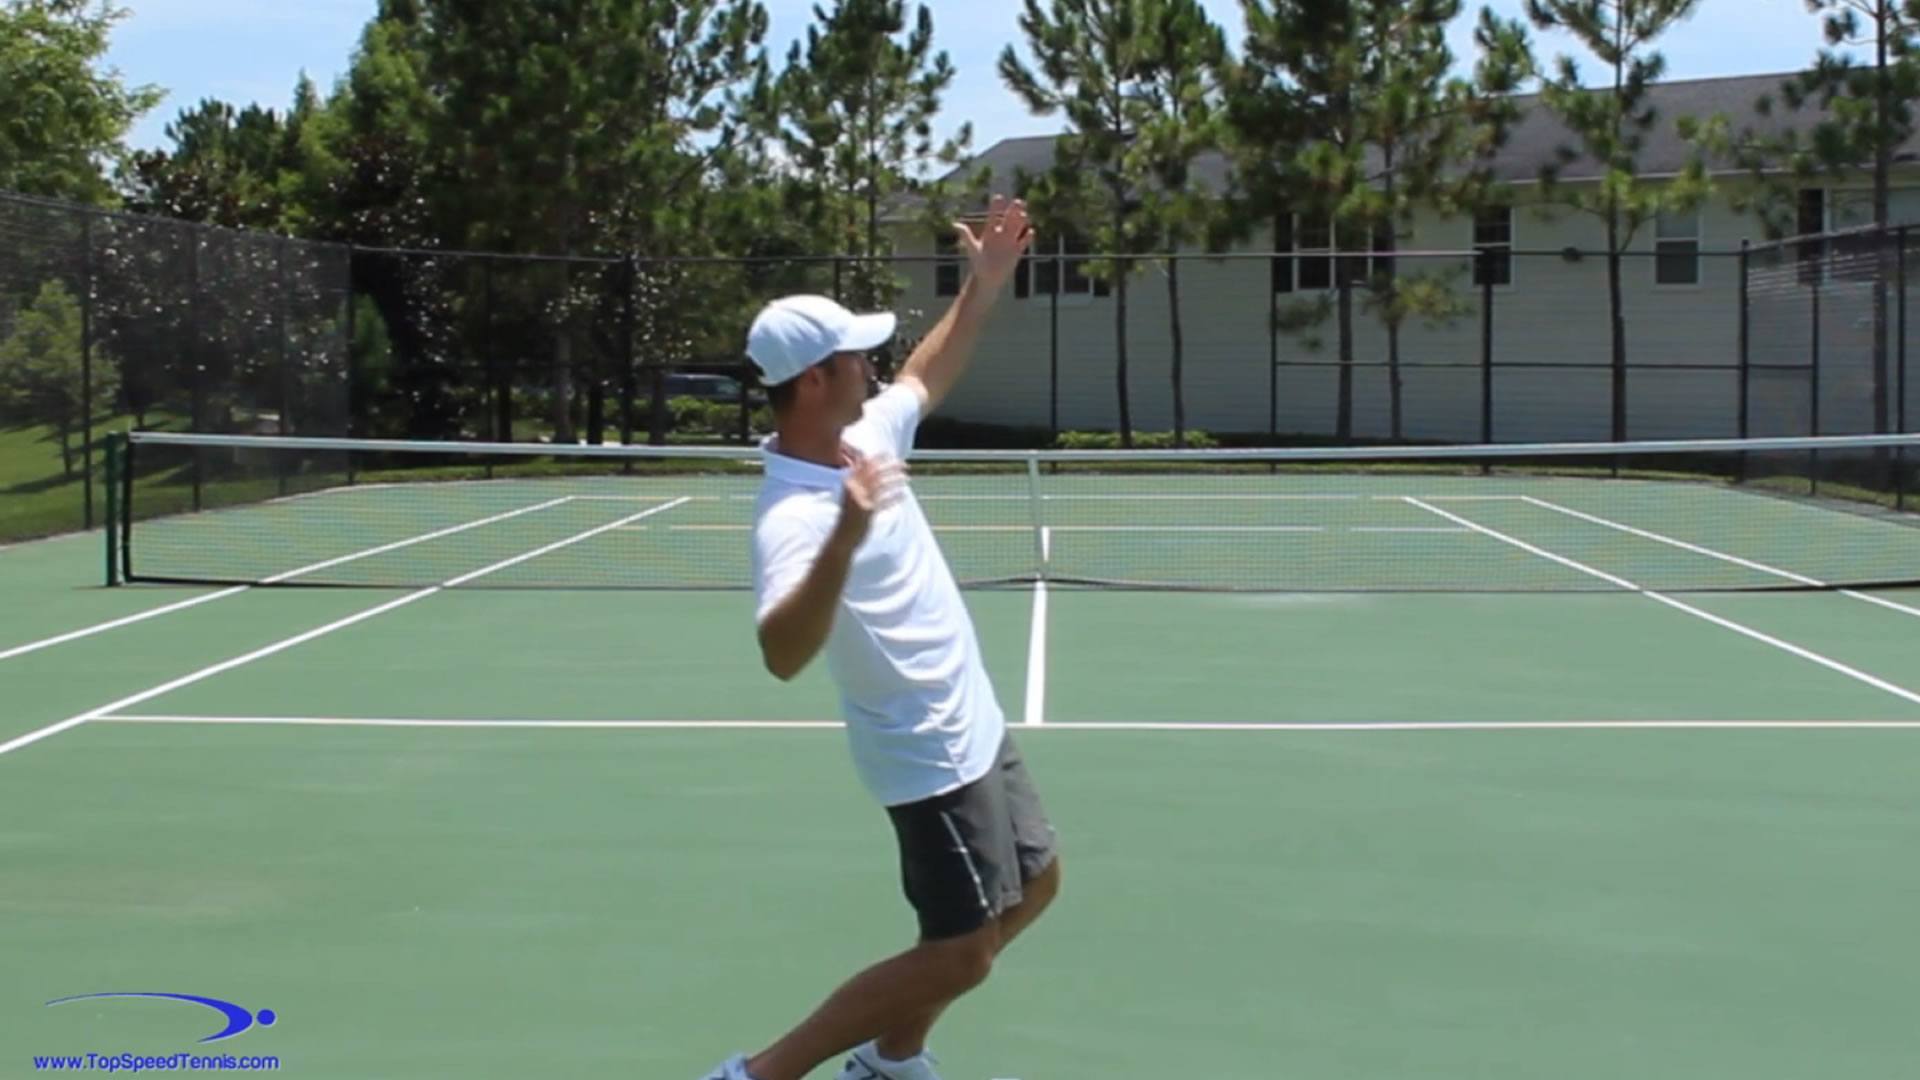 2.3 Use Lower Body for Powerful Tennis Serve • Top Speed Tennis